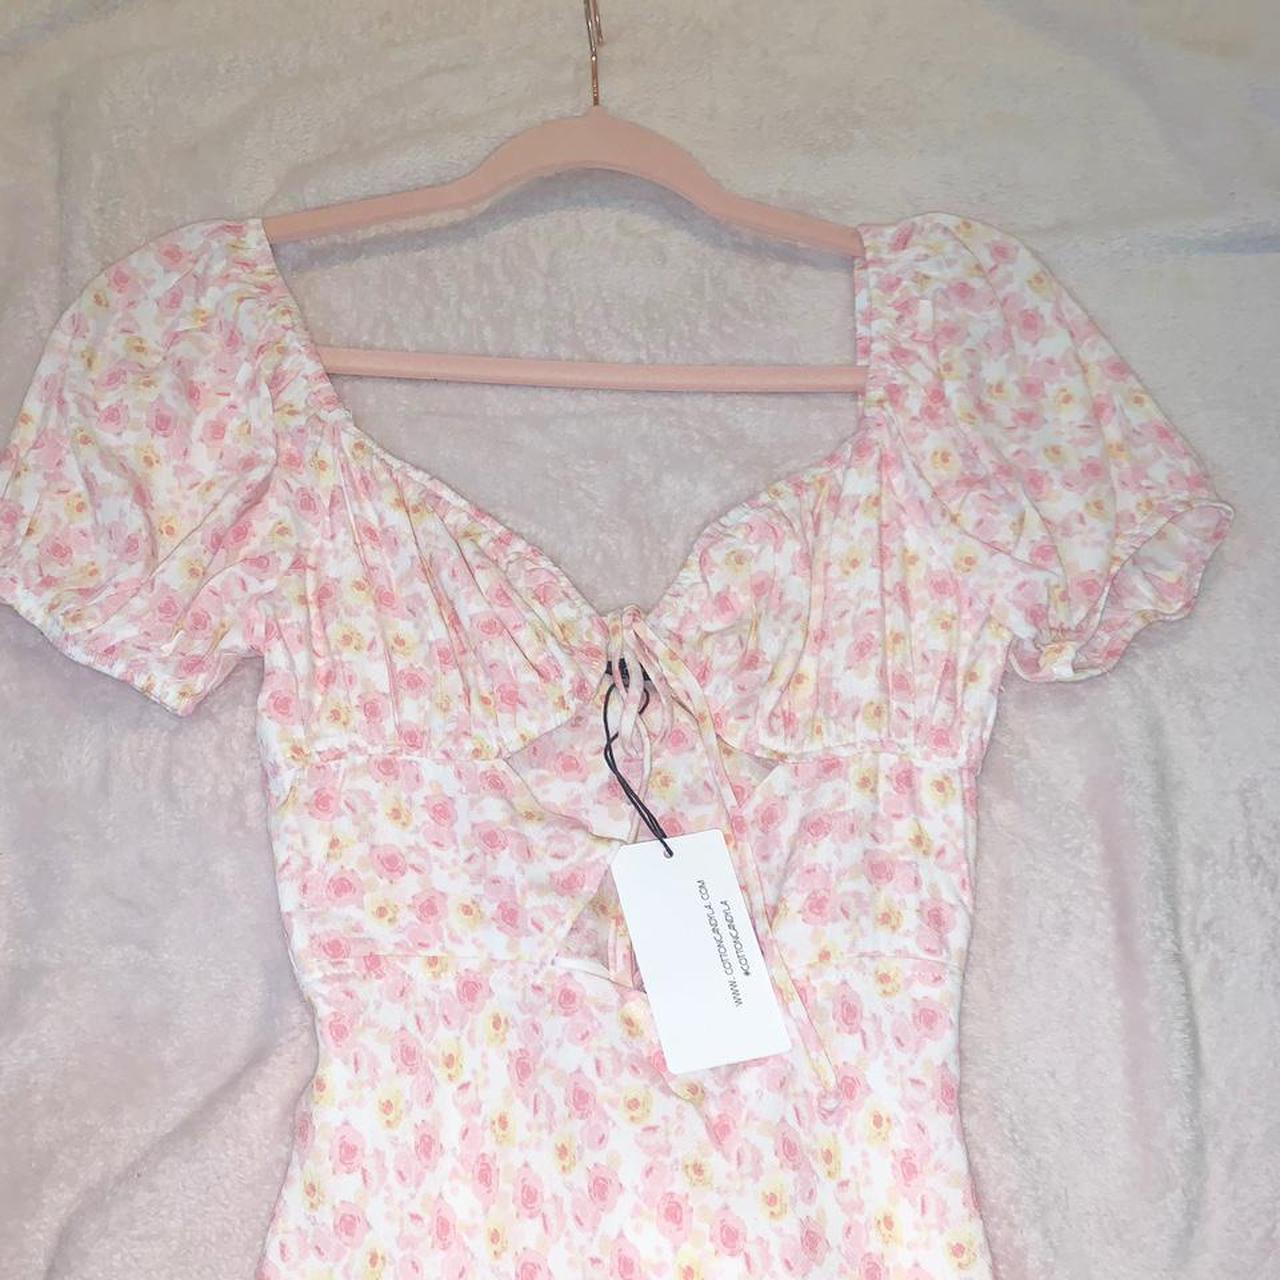 Princess Polly Women's Pink and White Dress | Depop